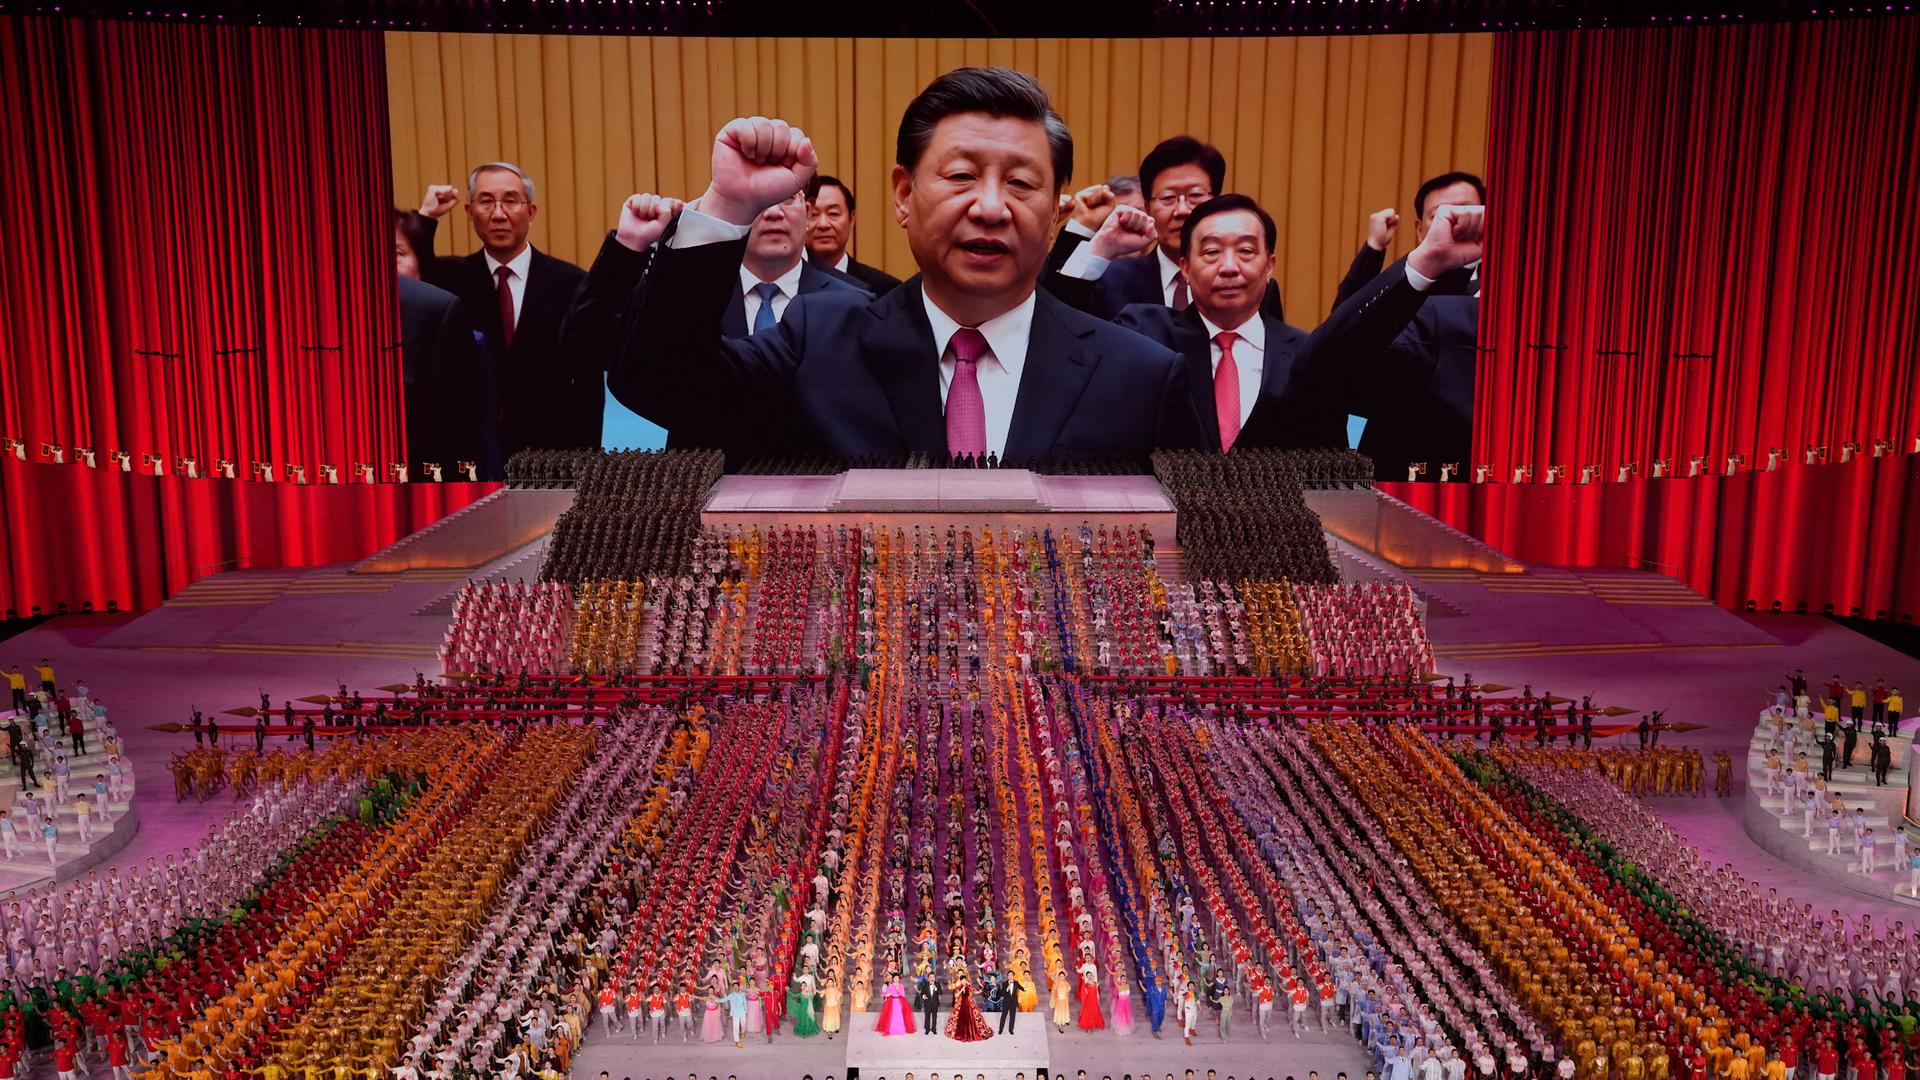 A large auditorium is shown filled with people in color-coordinated clothing with Chinese President Xi Jinping projected on a large screen in the distance.